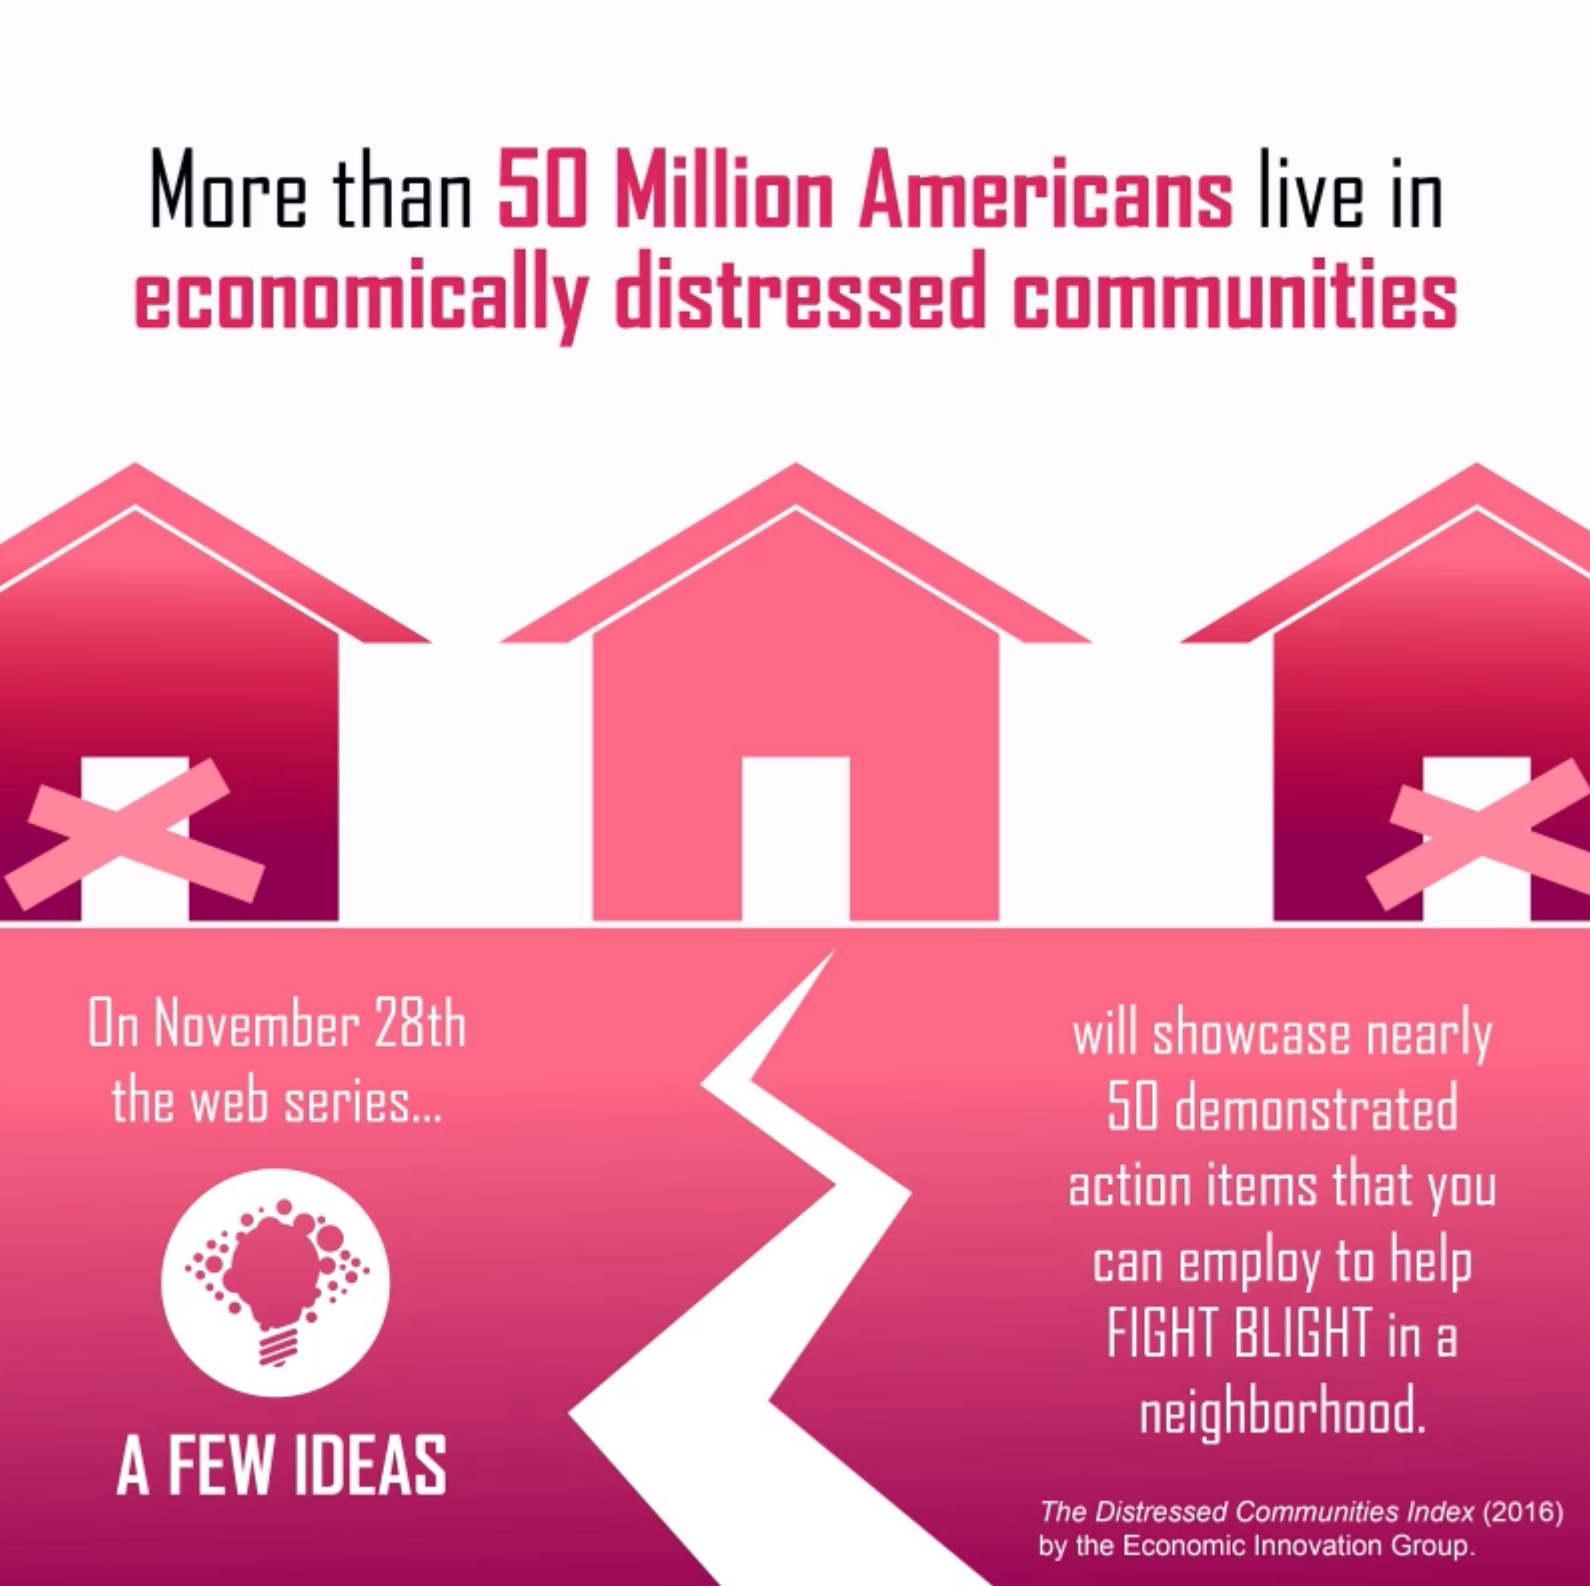 A pink and white infographic that talks about how more than 50 million Americans live in economically distressed communities.